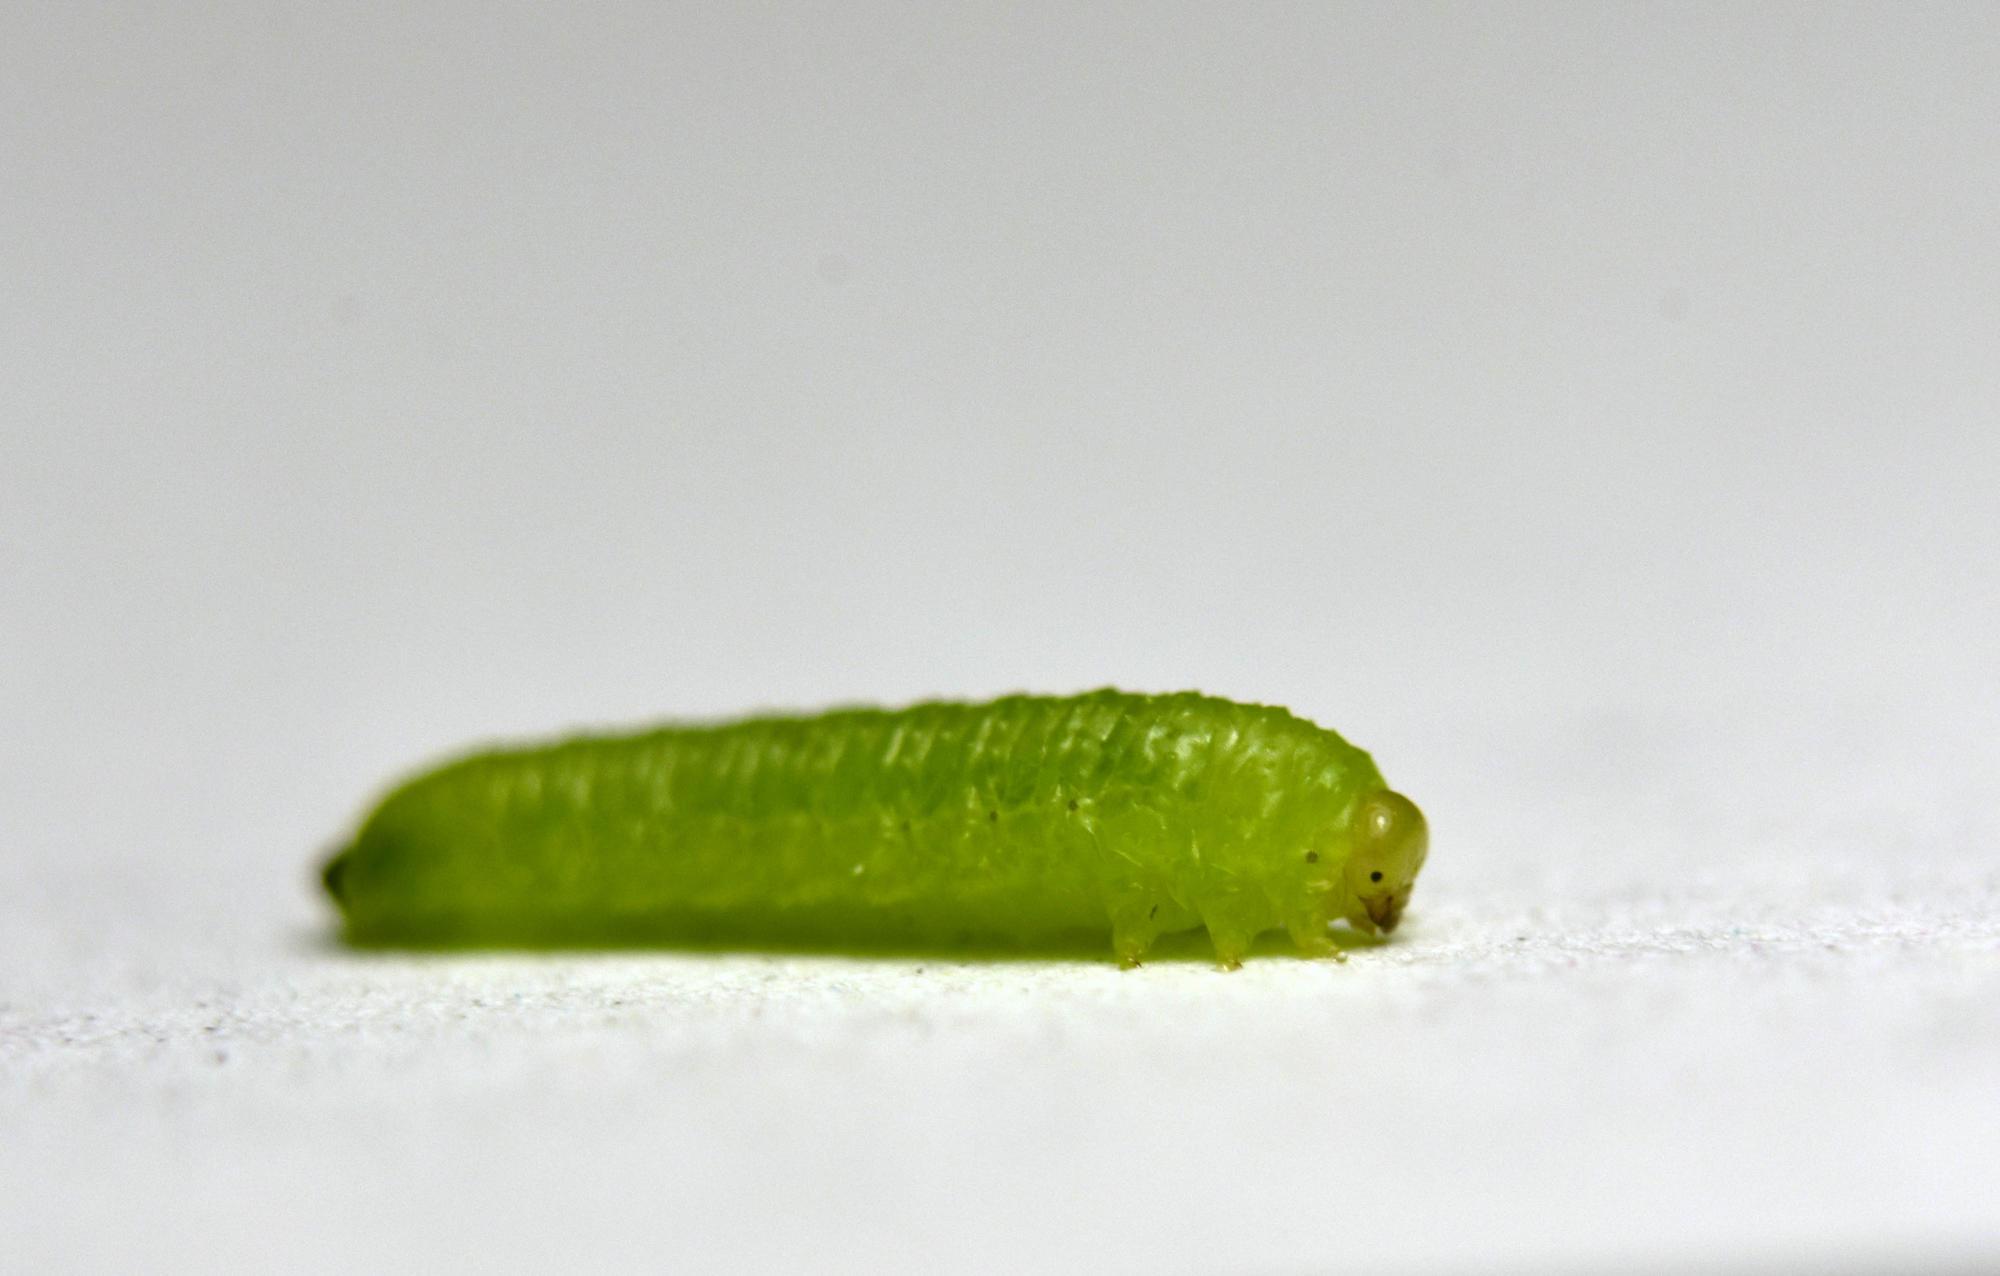 small green oblong-shaped larva on white background. Mandibles visible at bottom right.